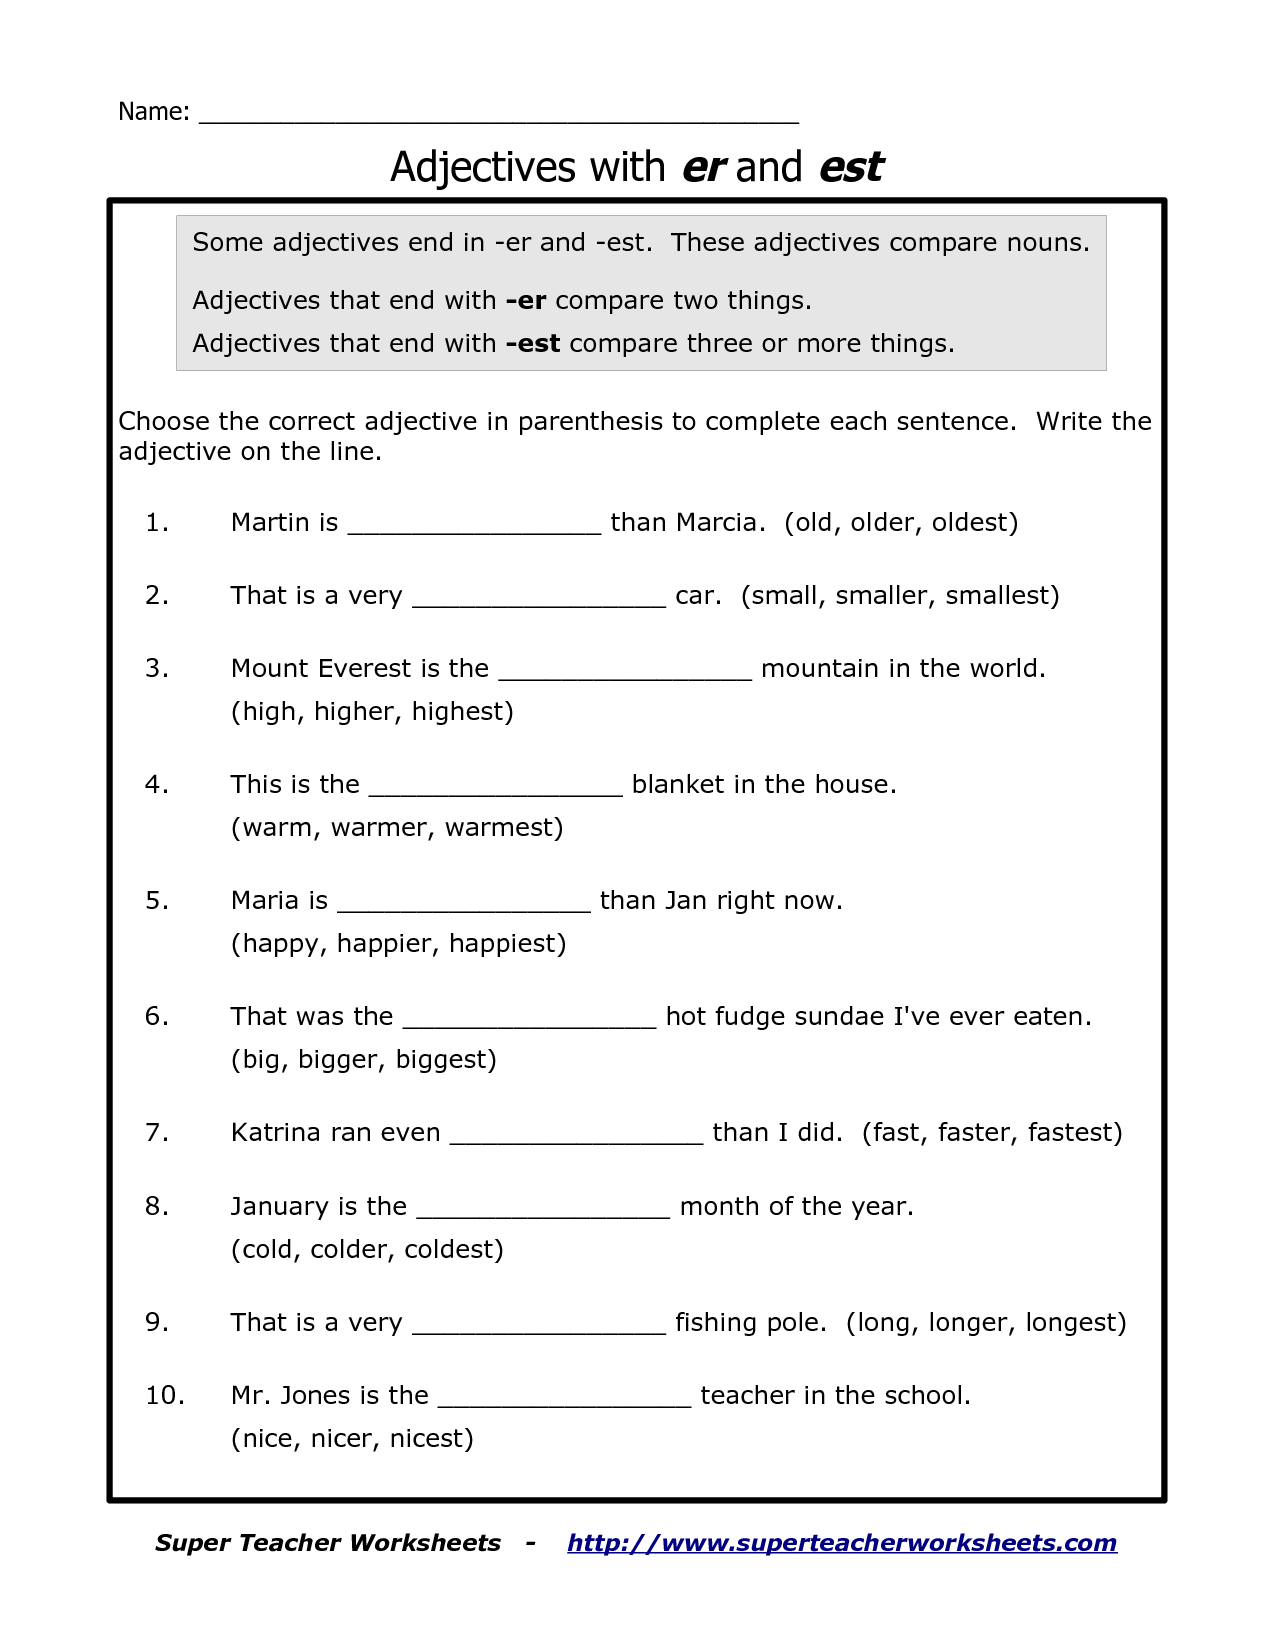 16-best-images-of-adjectives-that-compare-worksheets-comparative